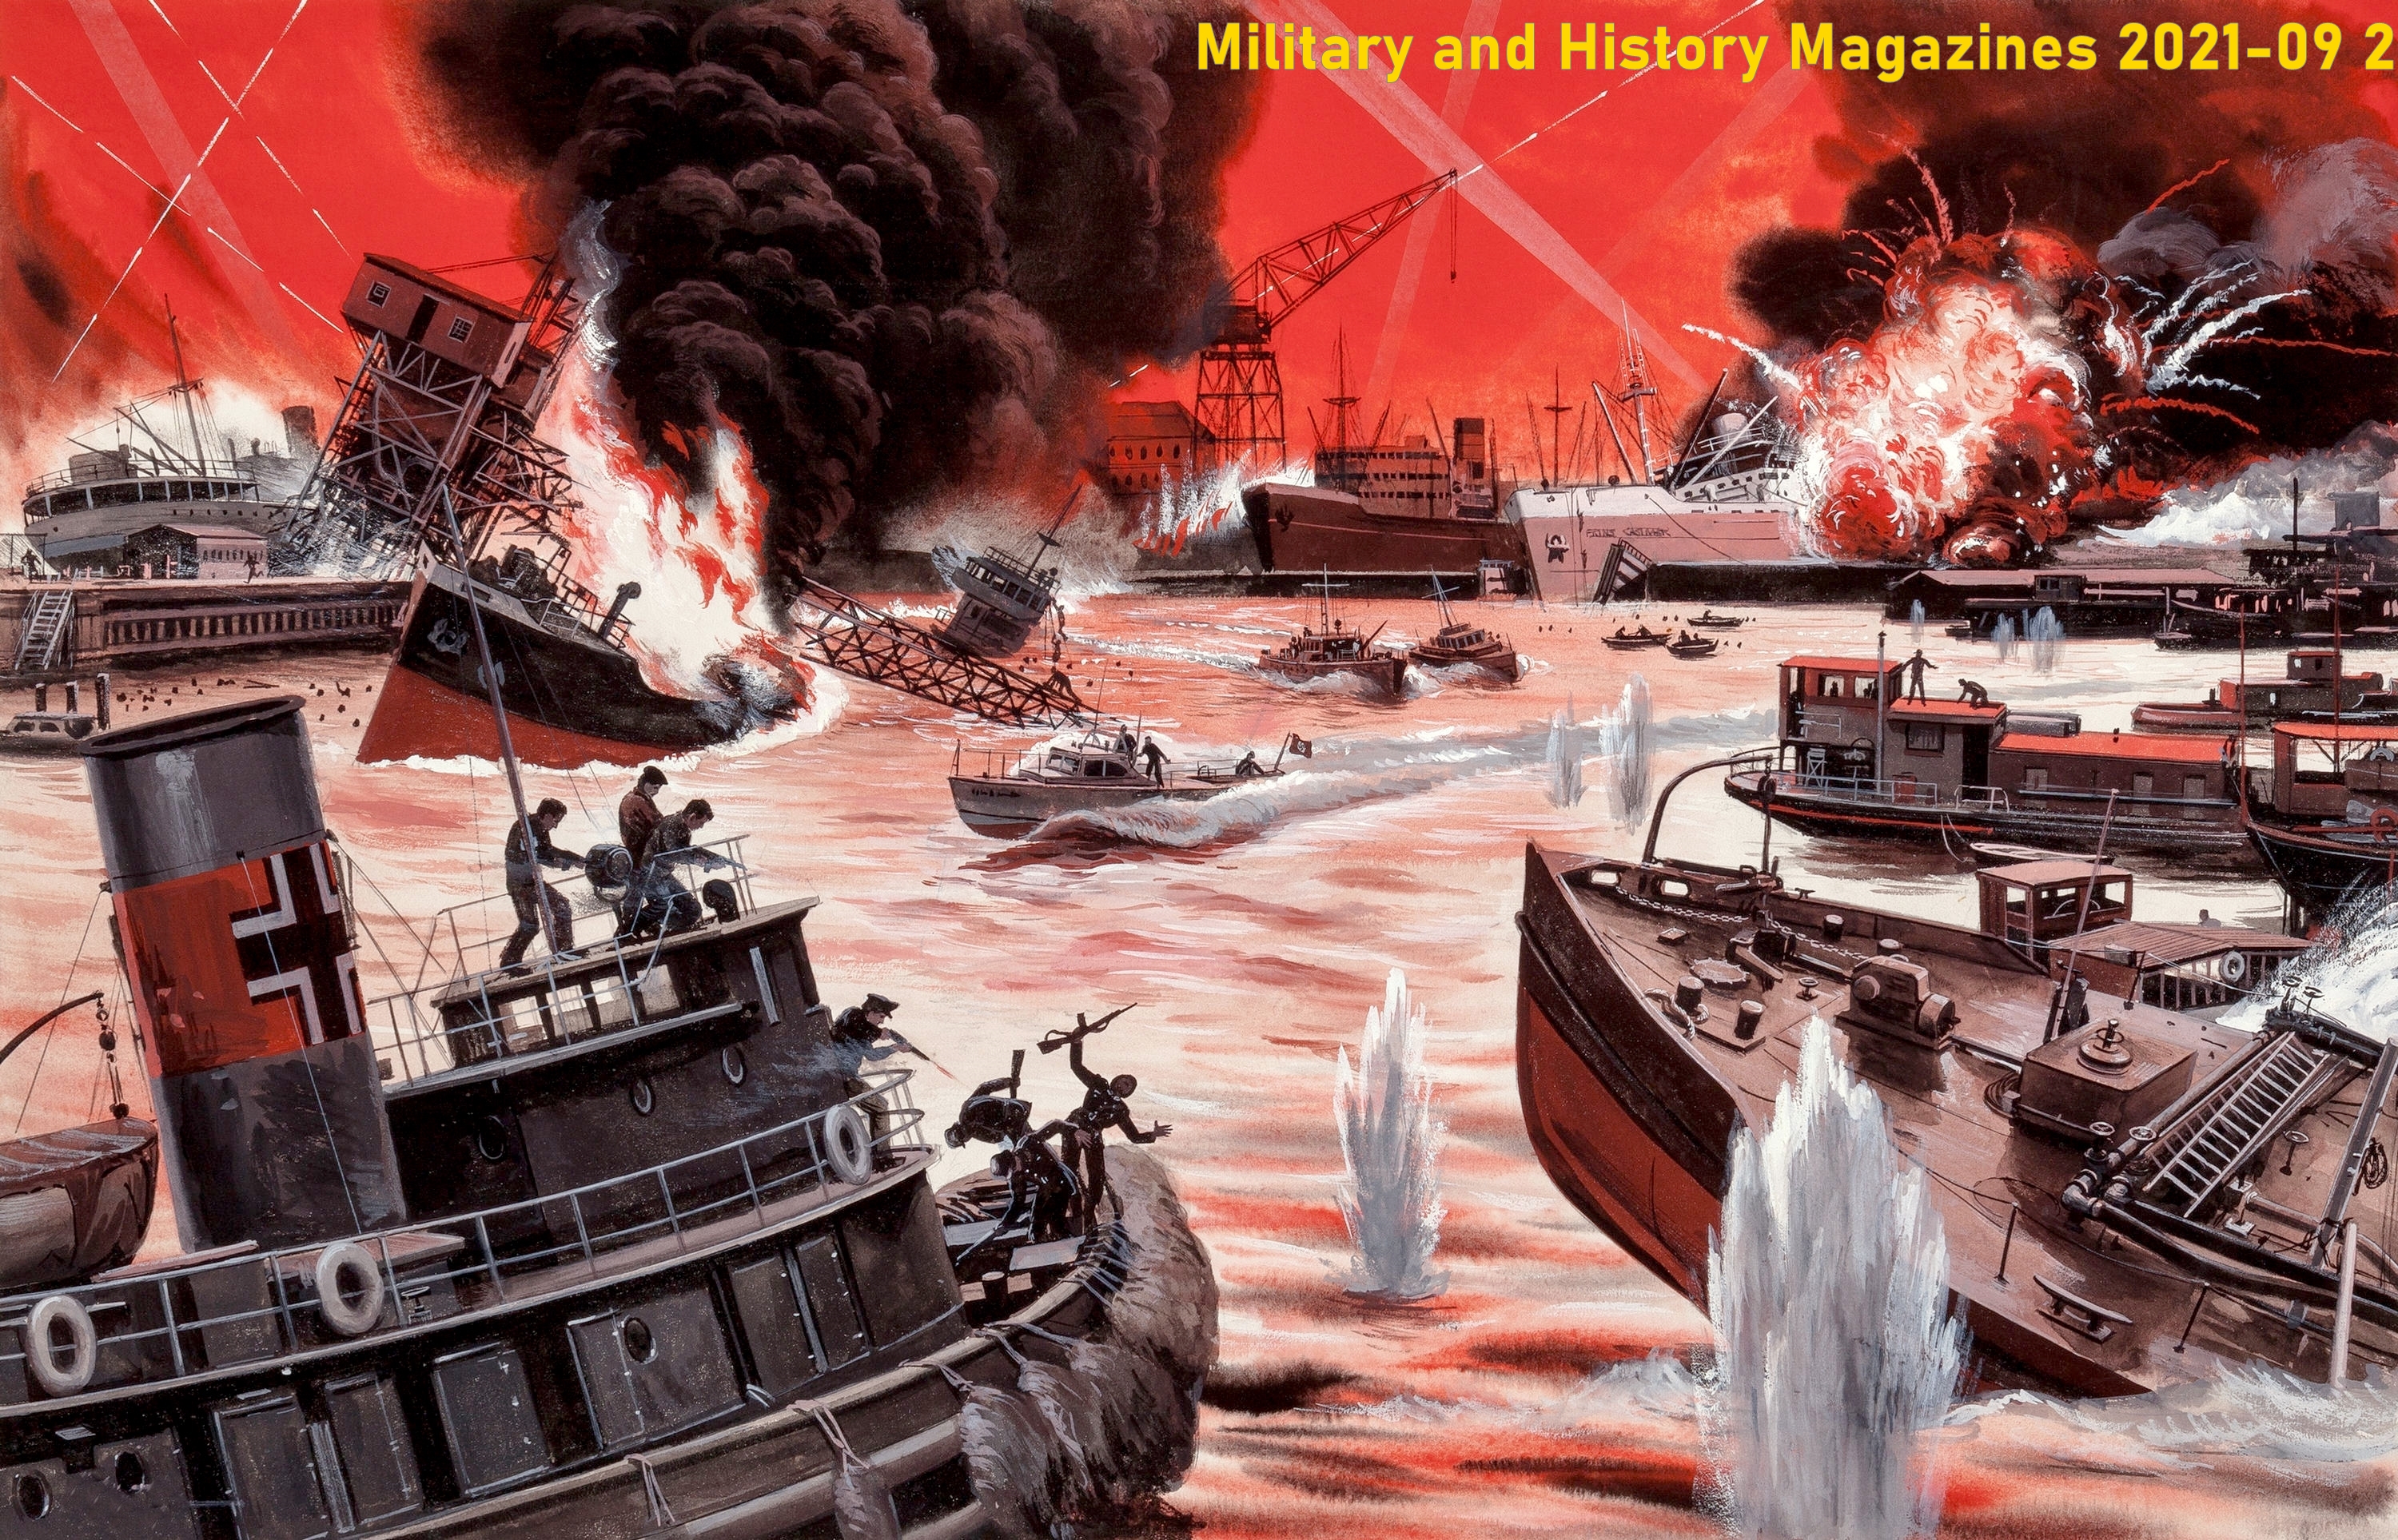 Military and History Magazines 2021-09 2